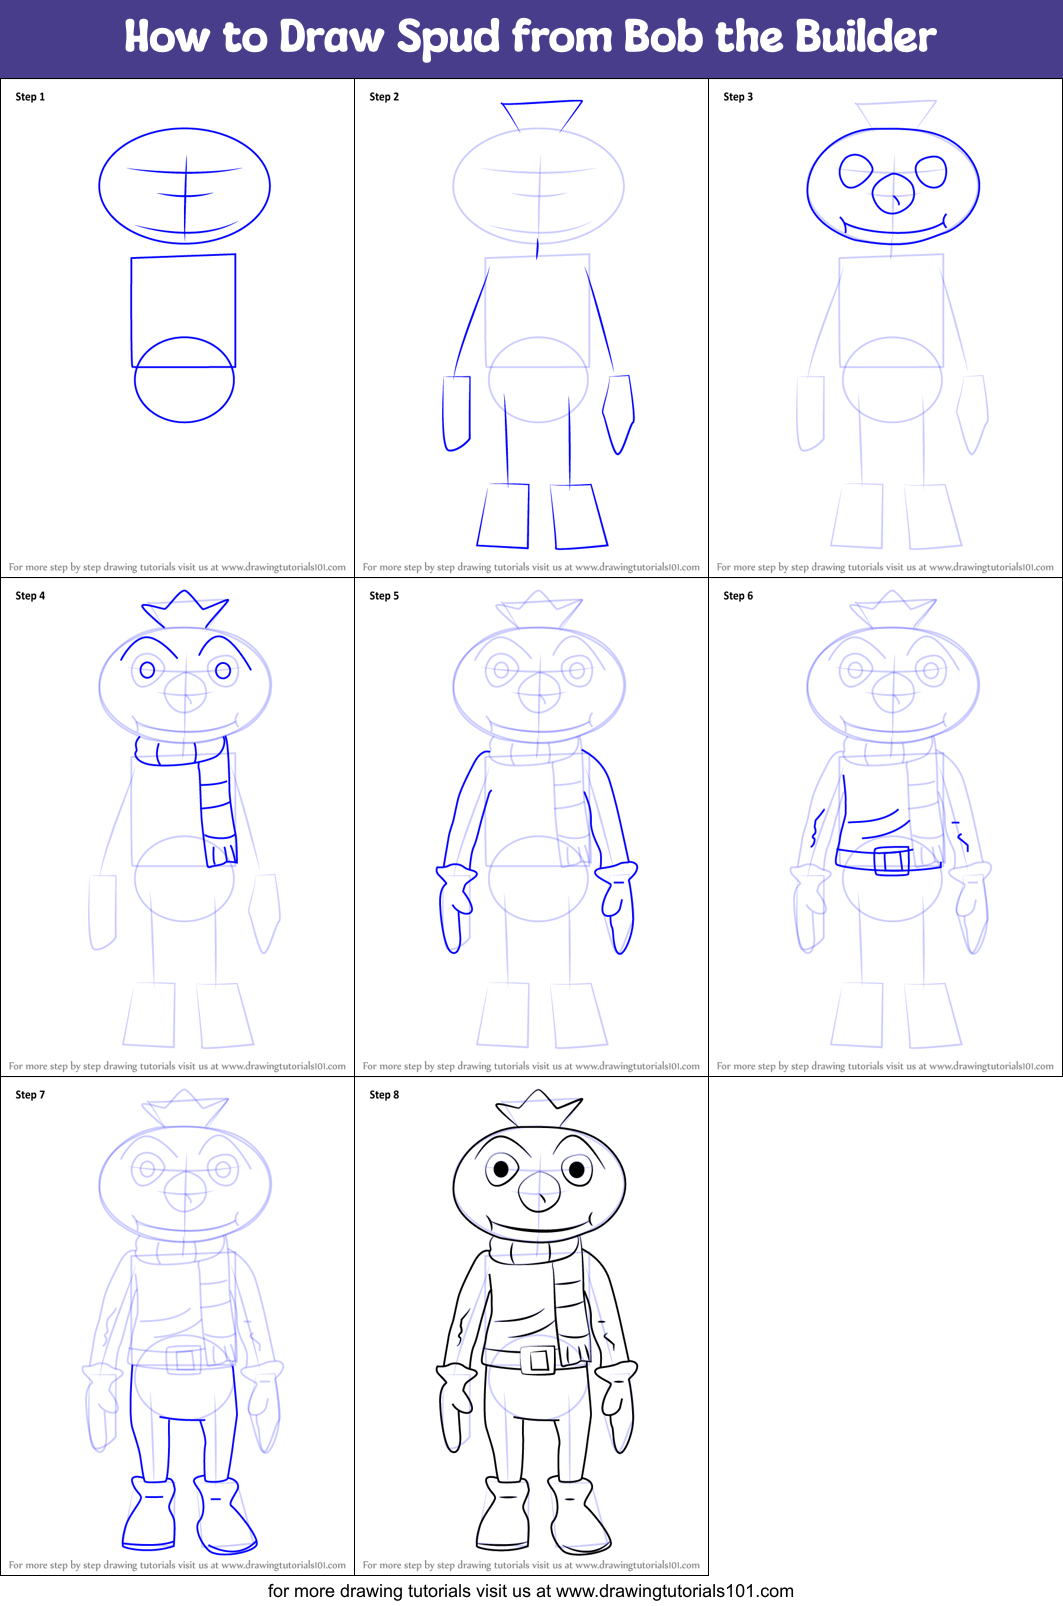 How to Draw Roley from Bob the Builder (Bob the Builder) Step by Step |  DrawingTutorials101.com